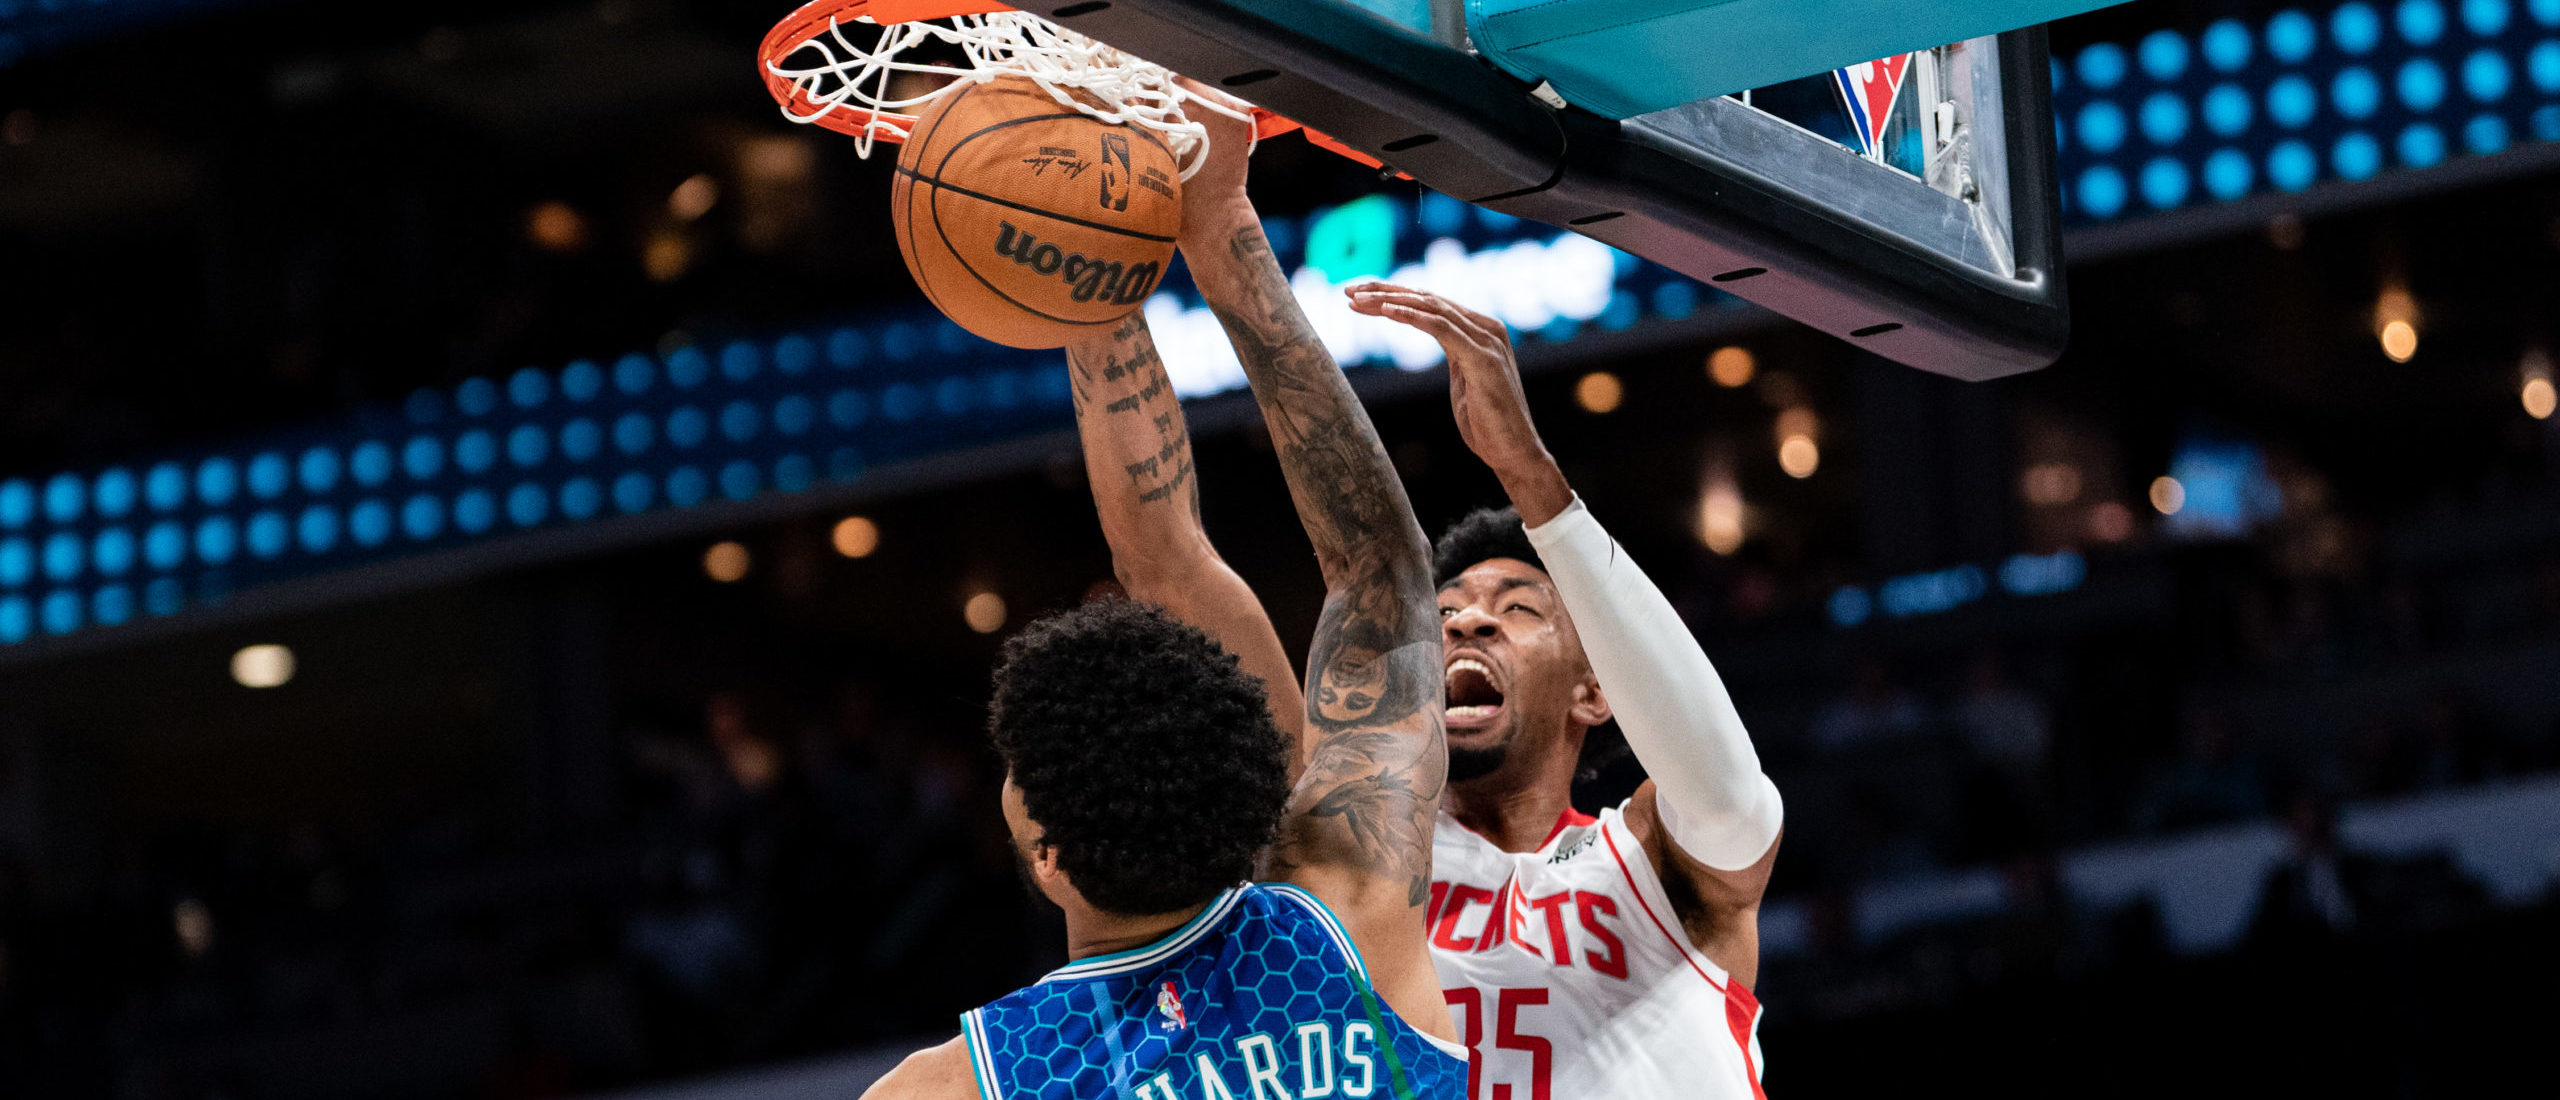 CHARLOTTE, NORTH CAROLINA - DECEMBER 27: Christian Wood #35 of the Houston Rockets dunks the ball over Nick Richards #14 of the Charlotte Hornets in the first quarter during their game at Spectrum Center on December 27, 2021 in Charlotte, North Carolina. NOTE TO USER: User expressly acknowledges and agrees that, by downloading and or using this photograph, User is consenting to the terms and conditions of the Getty Images License Agreement. (Photo by Jacob Kupferman/Getty Images)